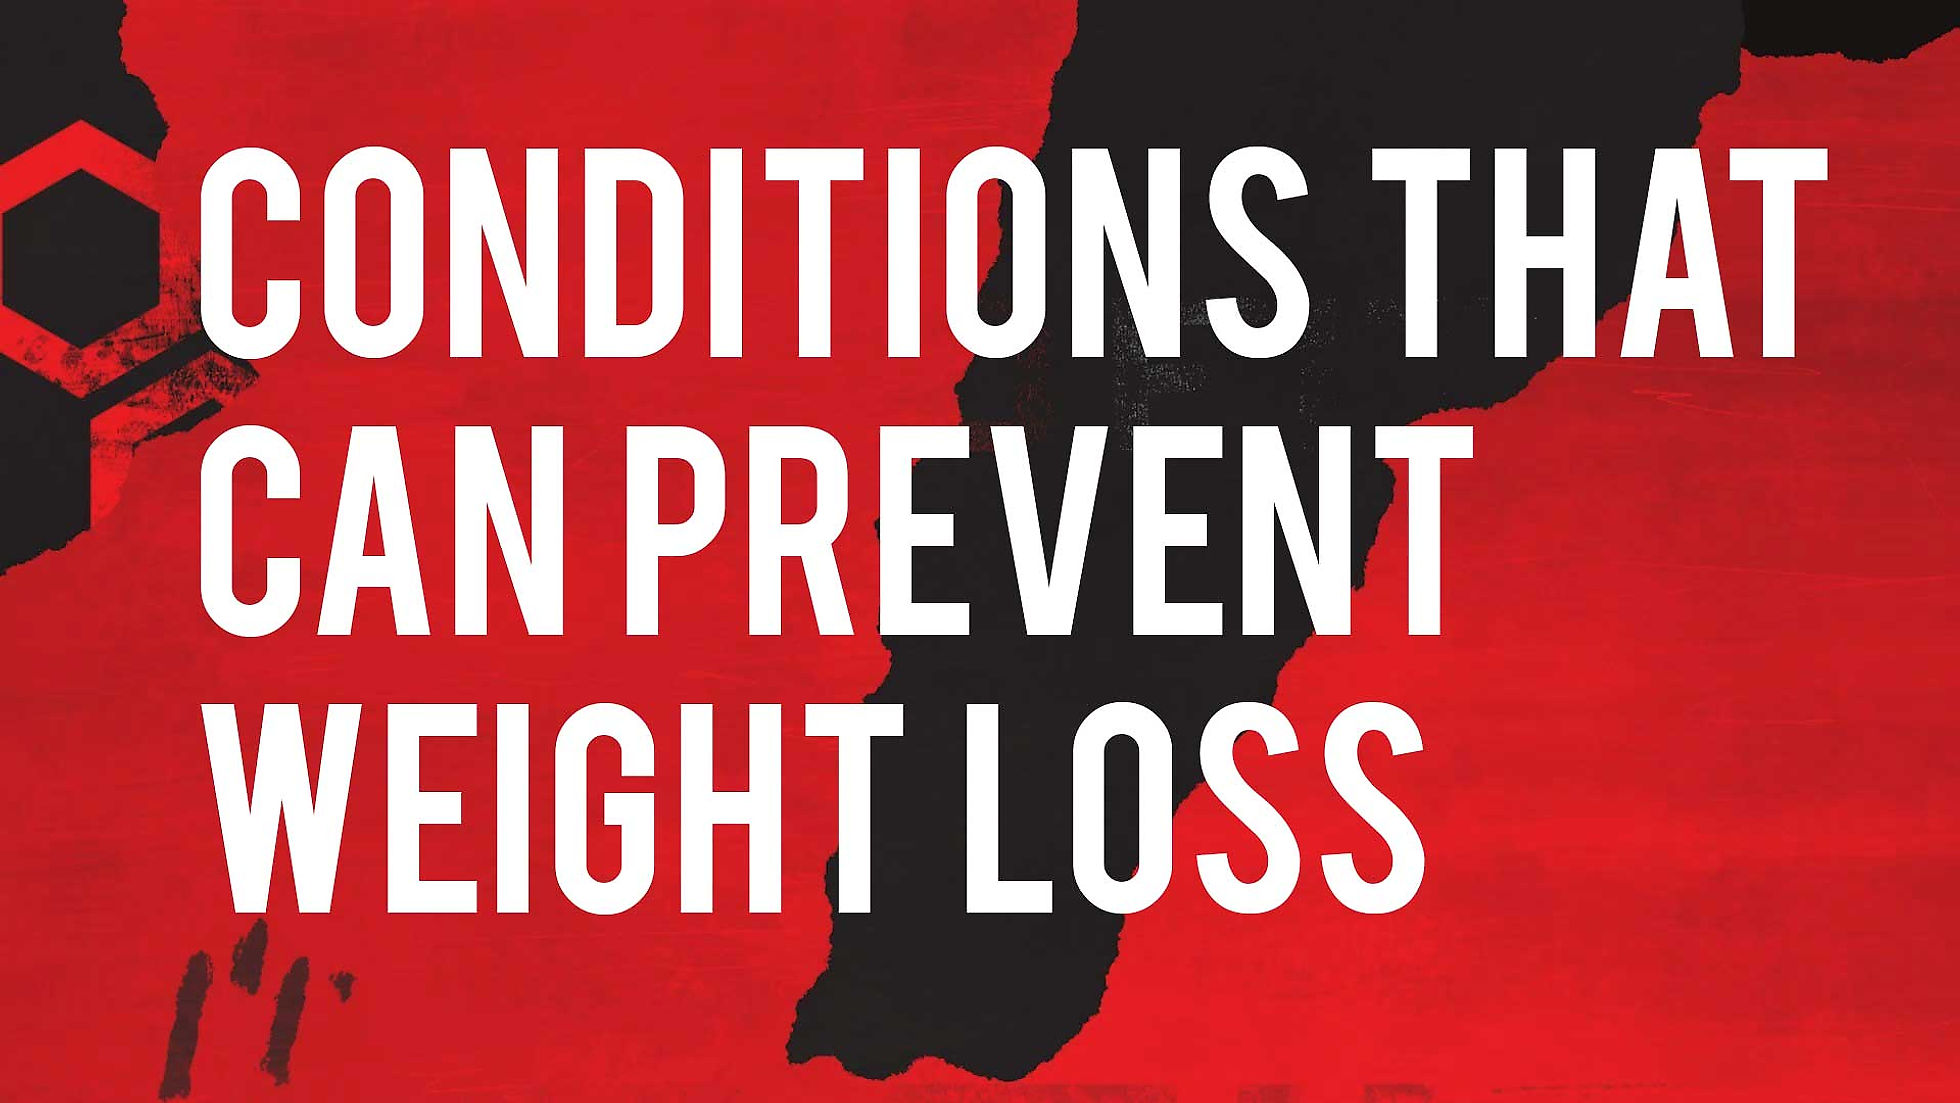 Conditions that can Prevent Weight Loss